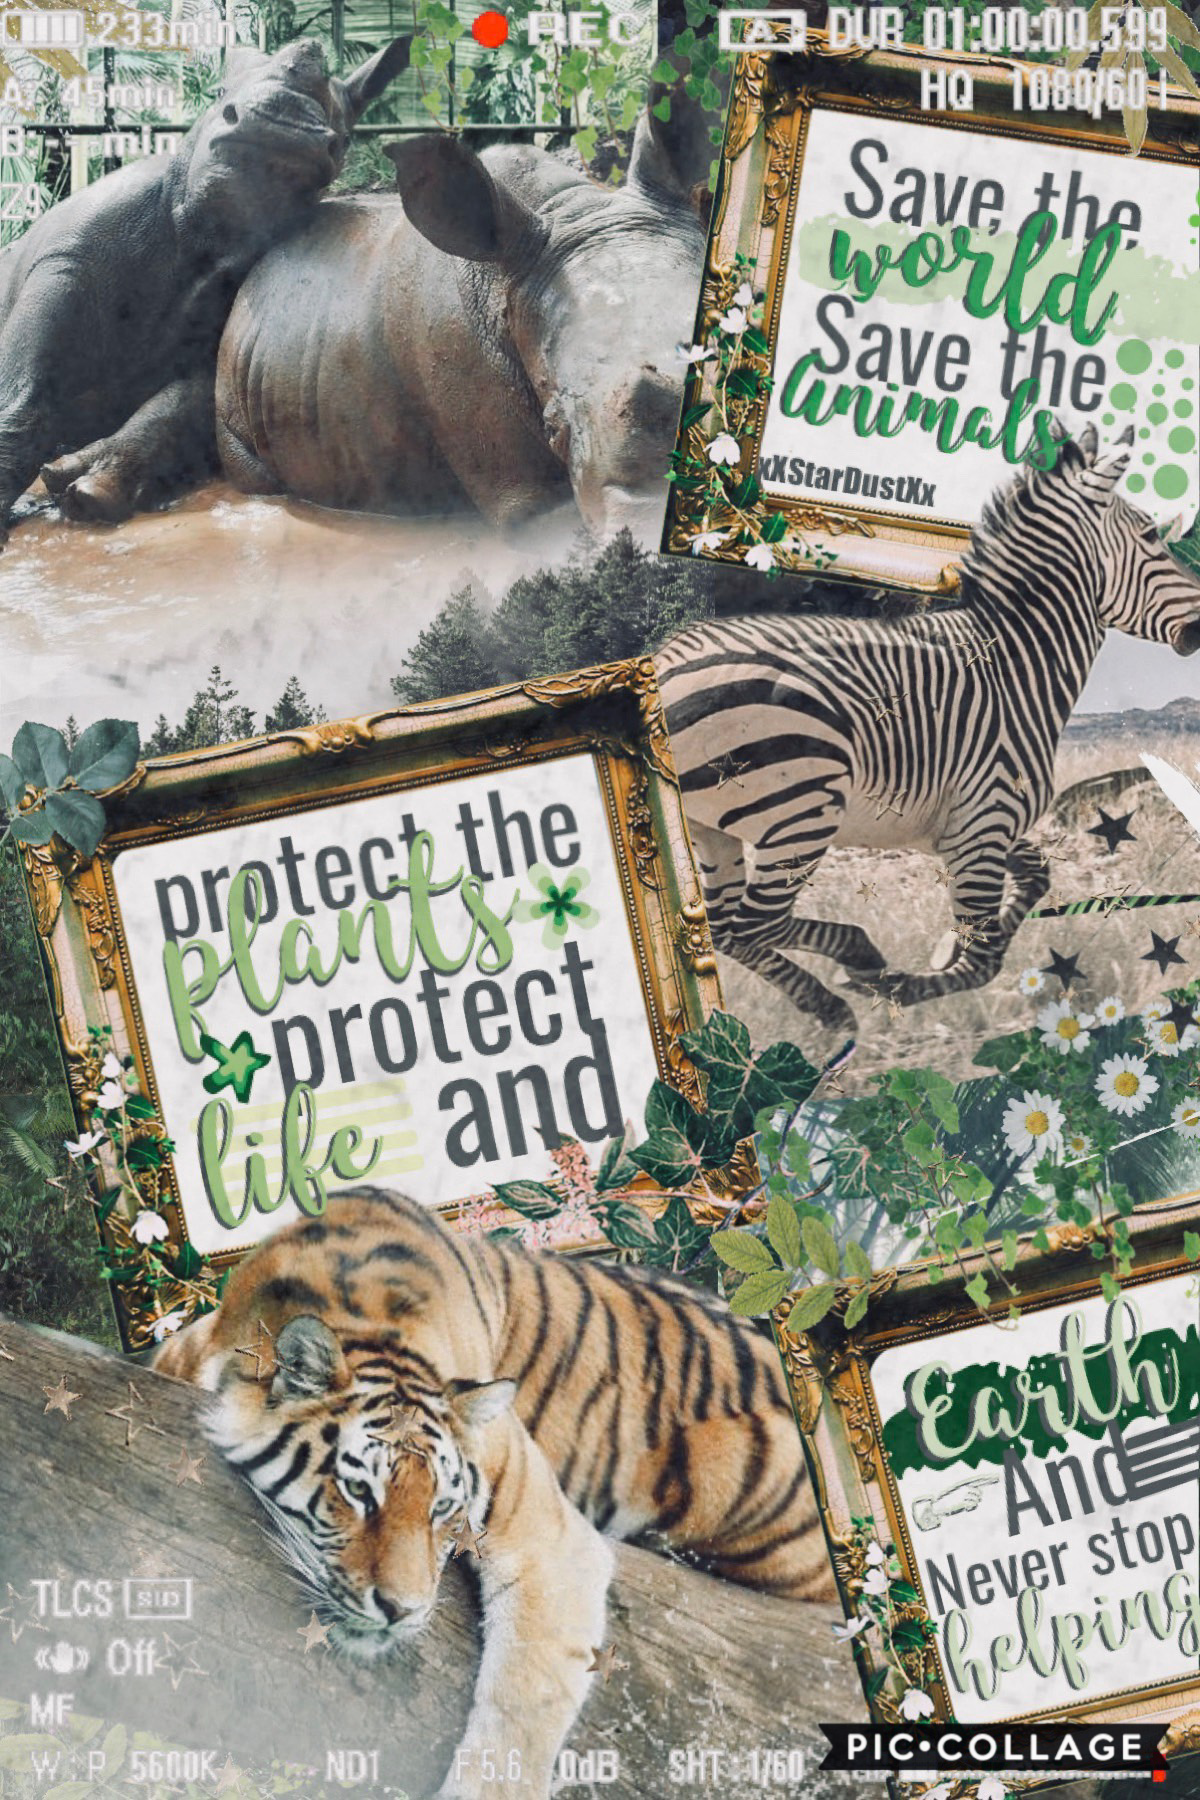 🌿tap🌿
Protect the environment and save the animals and plants
#protecttheplanet #savetheanimals #stoppoaching #stopglobalwarming